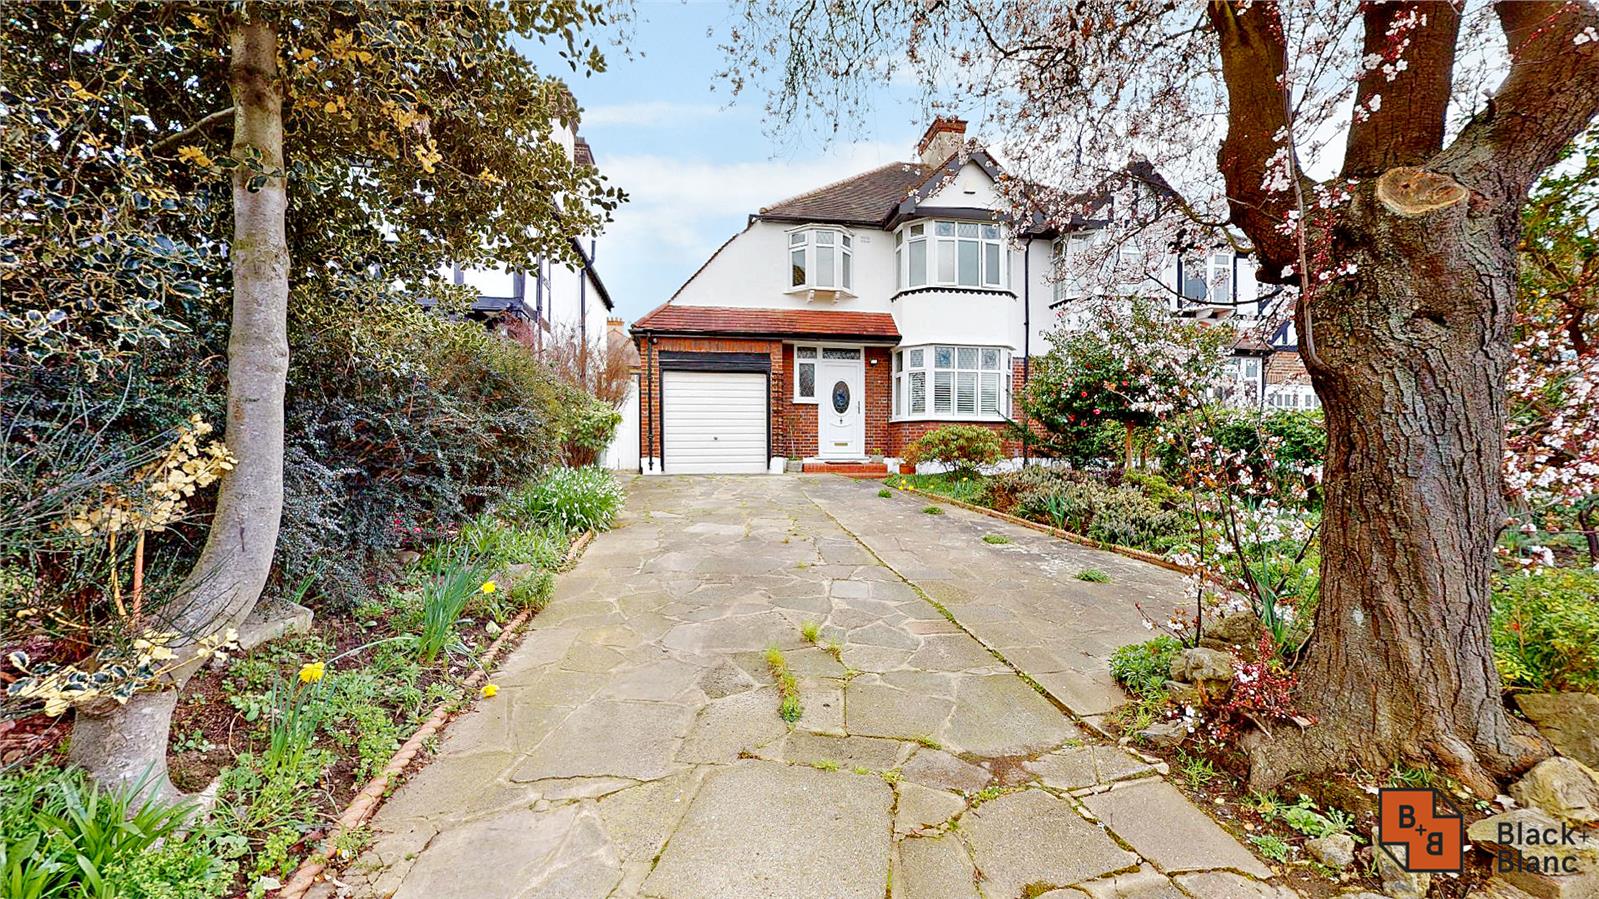 3 bed house for sale in Village Way, Beckenham - Property Image 1